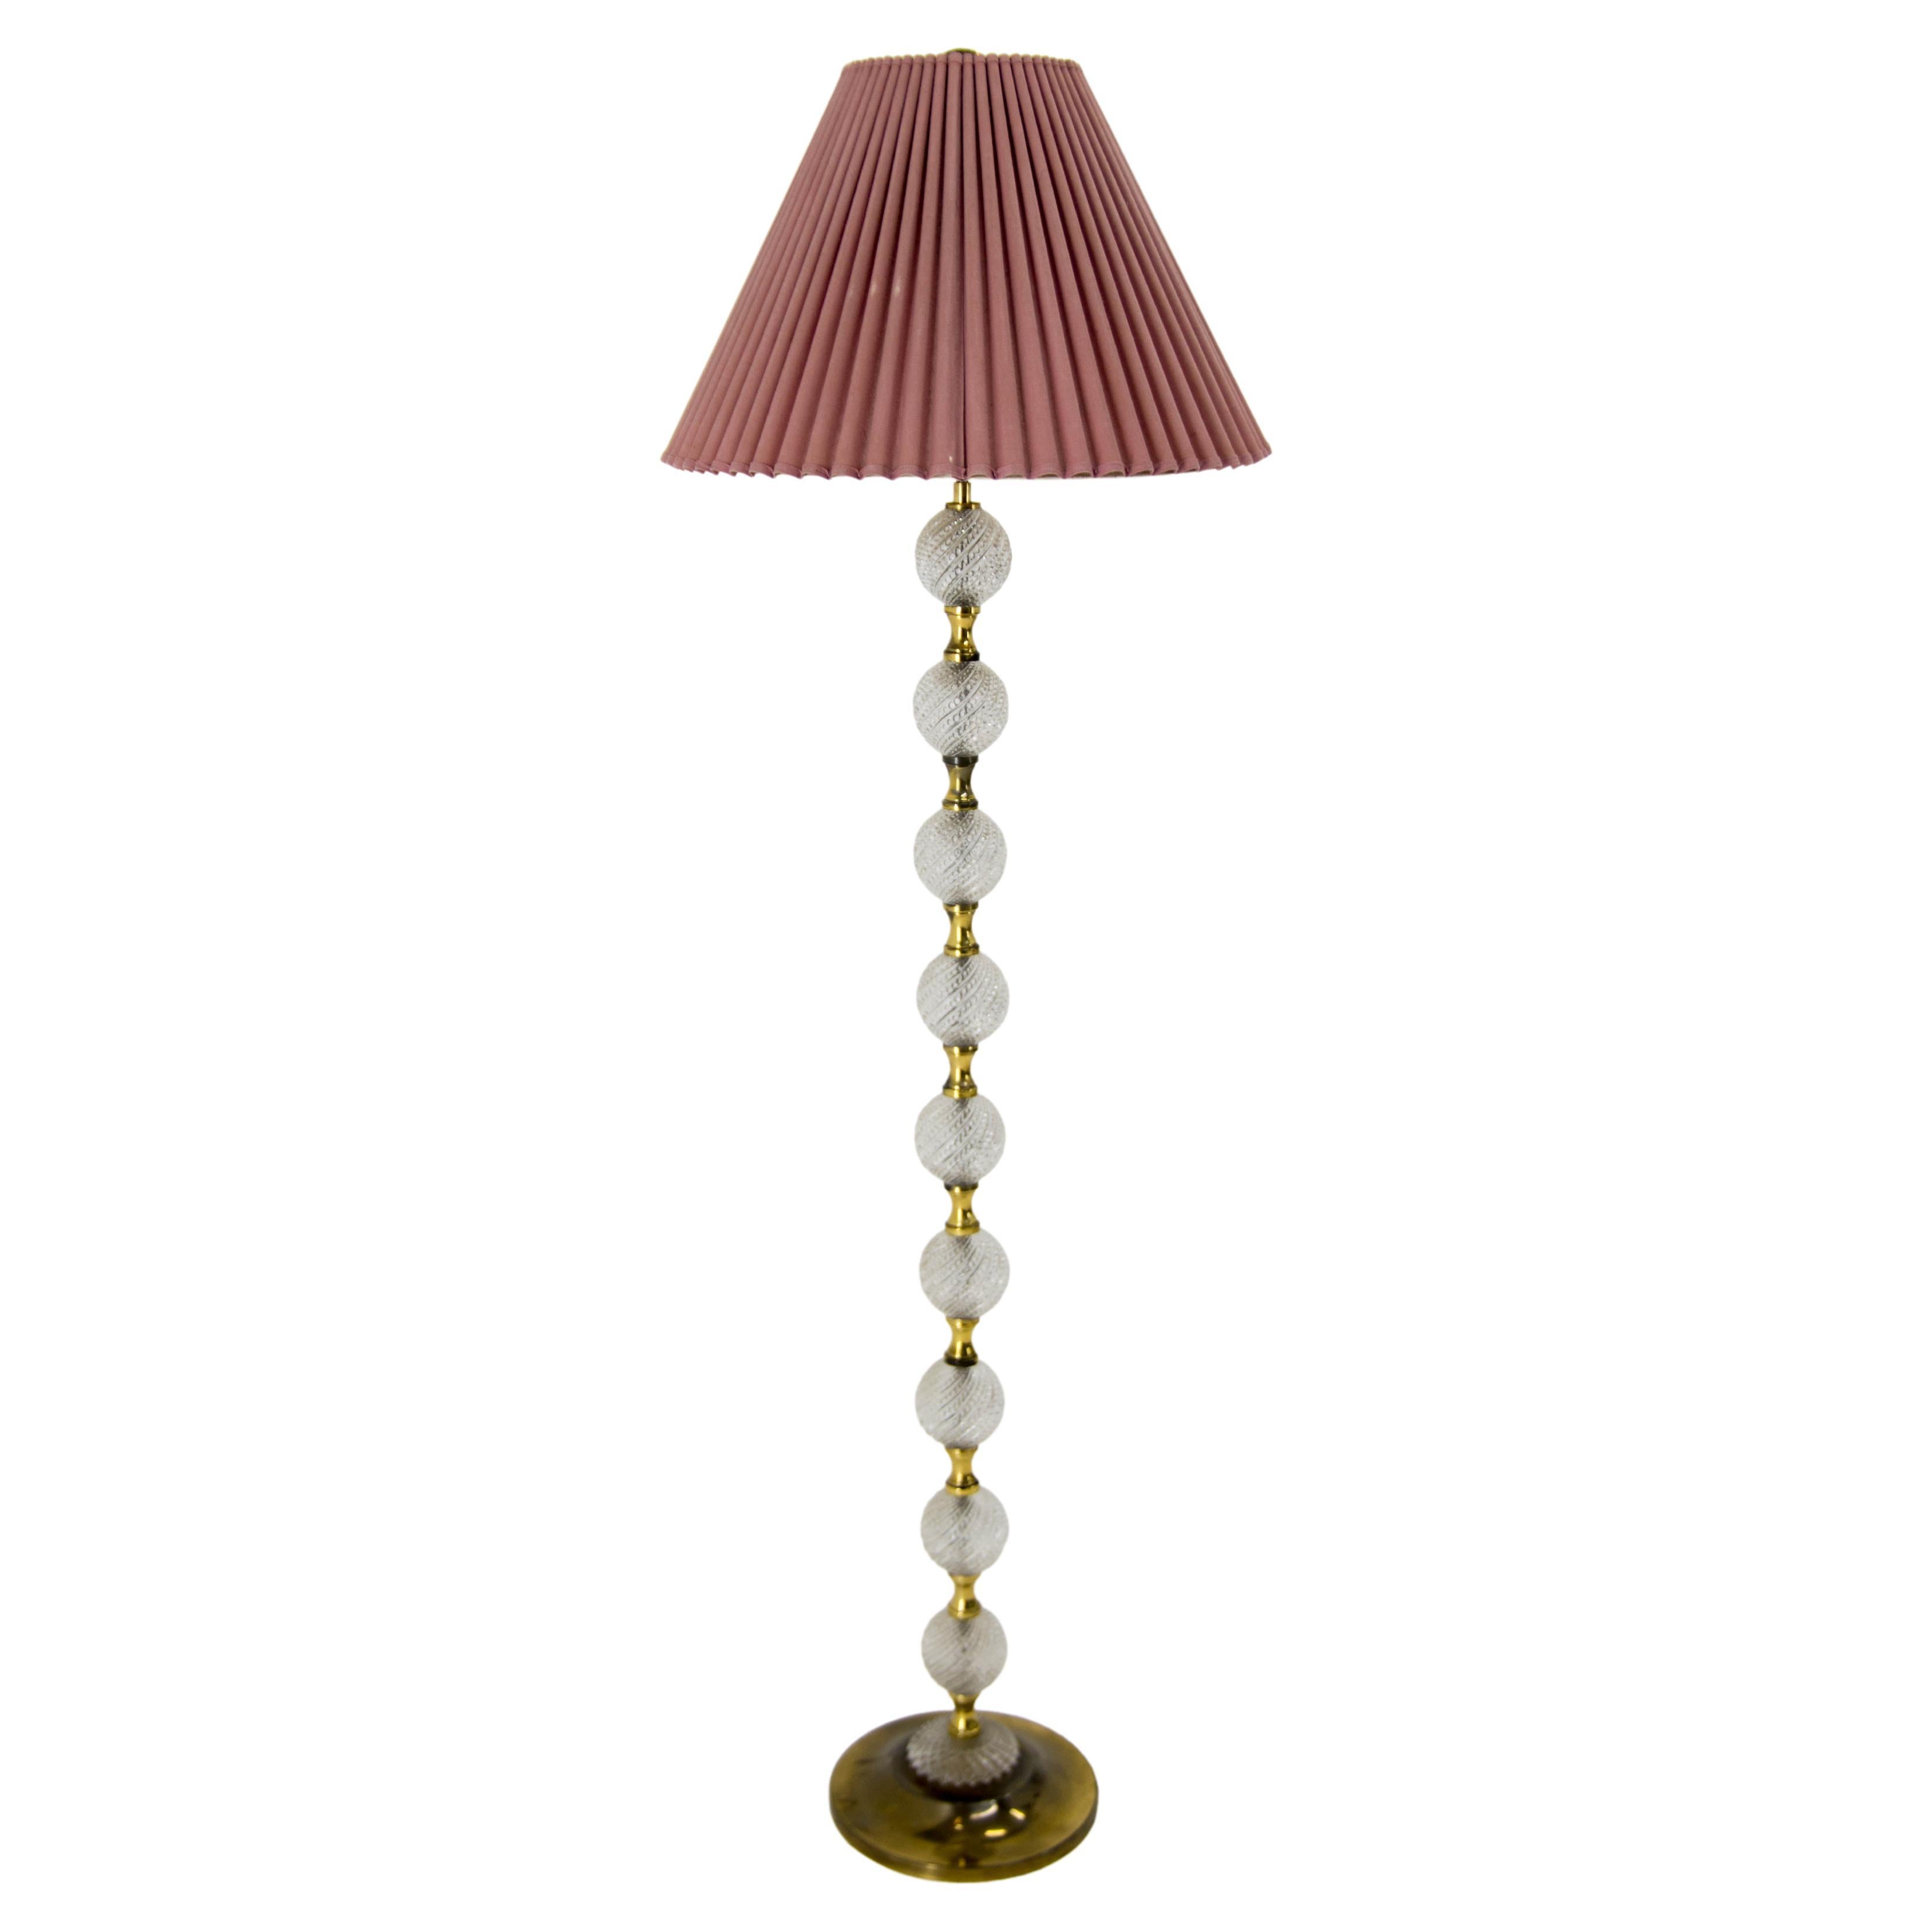 Floor Lamp by DBGM, Germany, 1980s